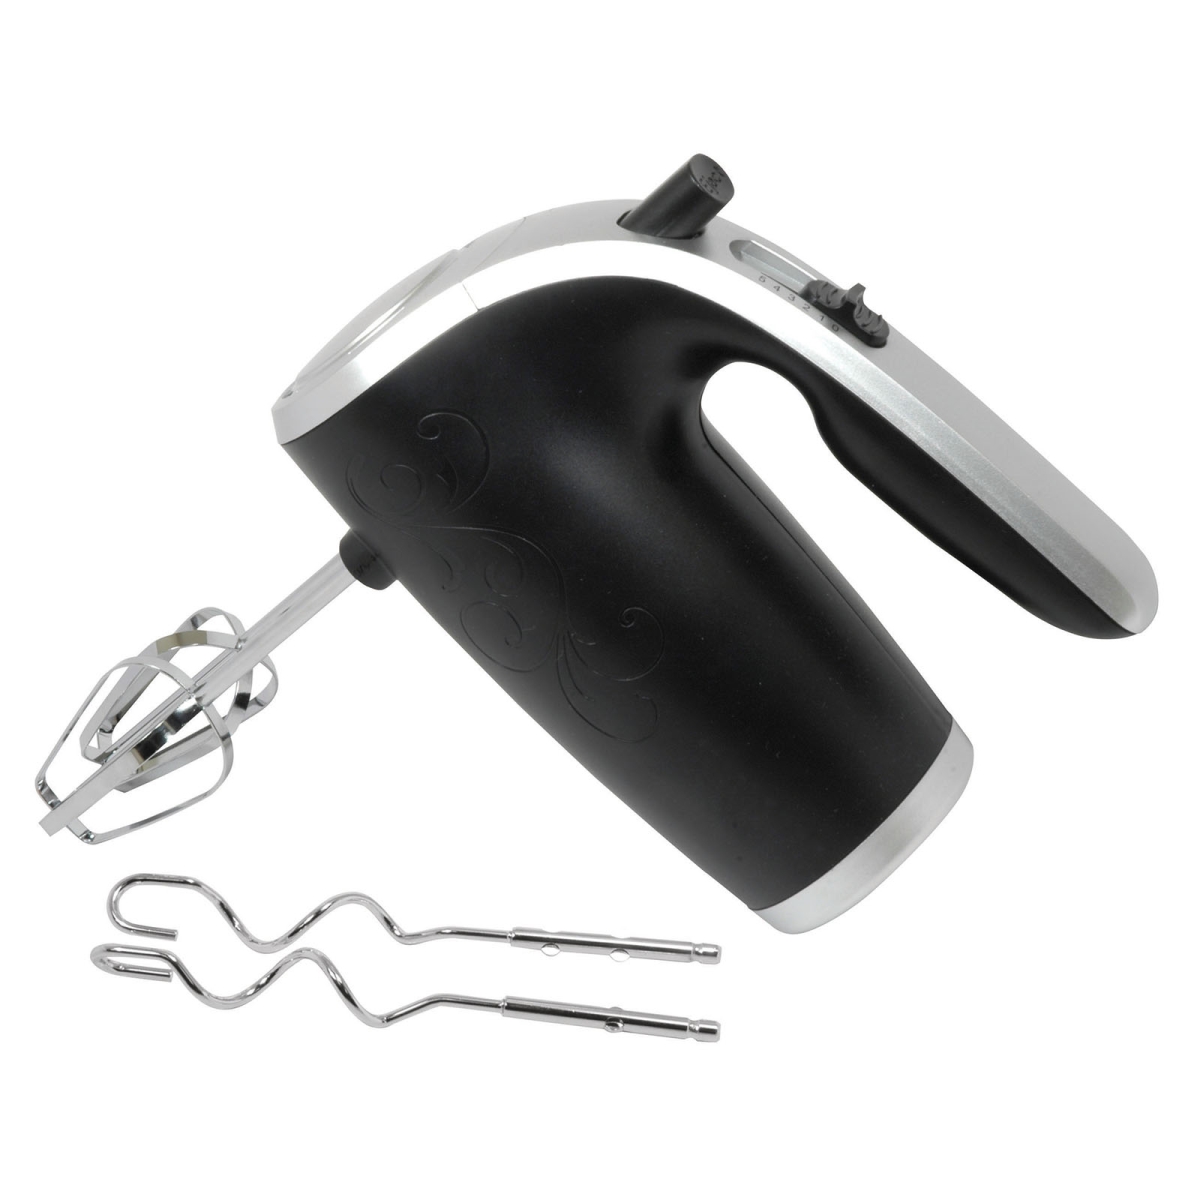 5 Speed 150 Watt Hand Mixer With Silver Accents, Black